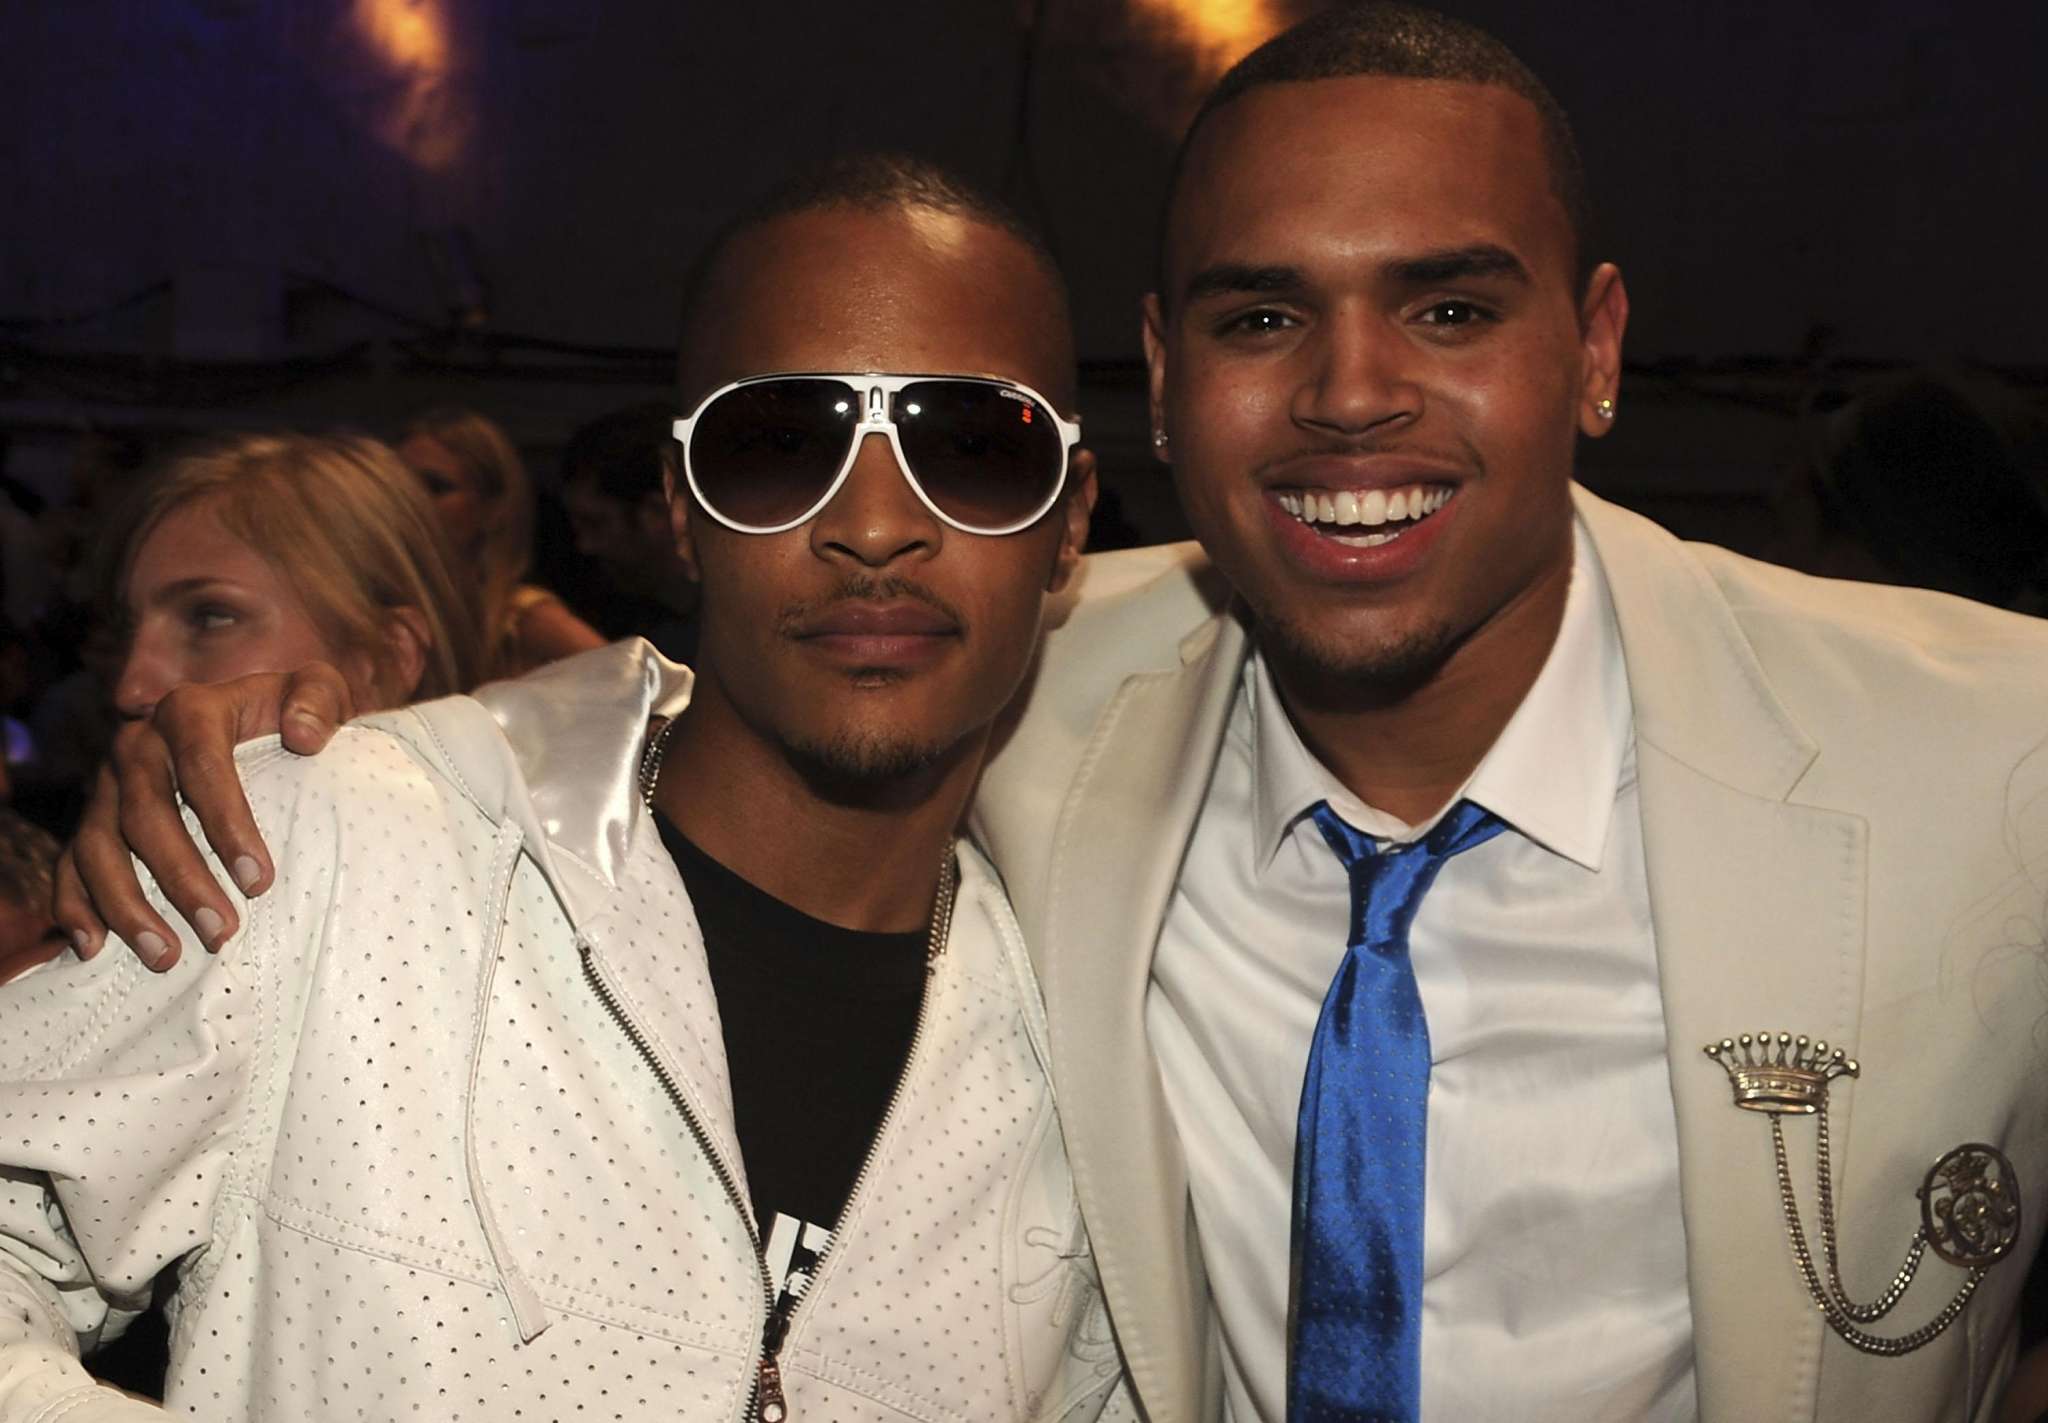 T.I. Believes That Chris Brown's False Accuser Should 'Face The Same Punishment As He Would Have' If He Raped Her